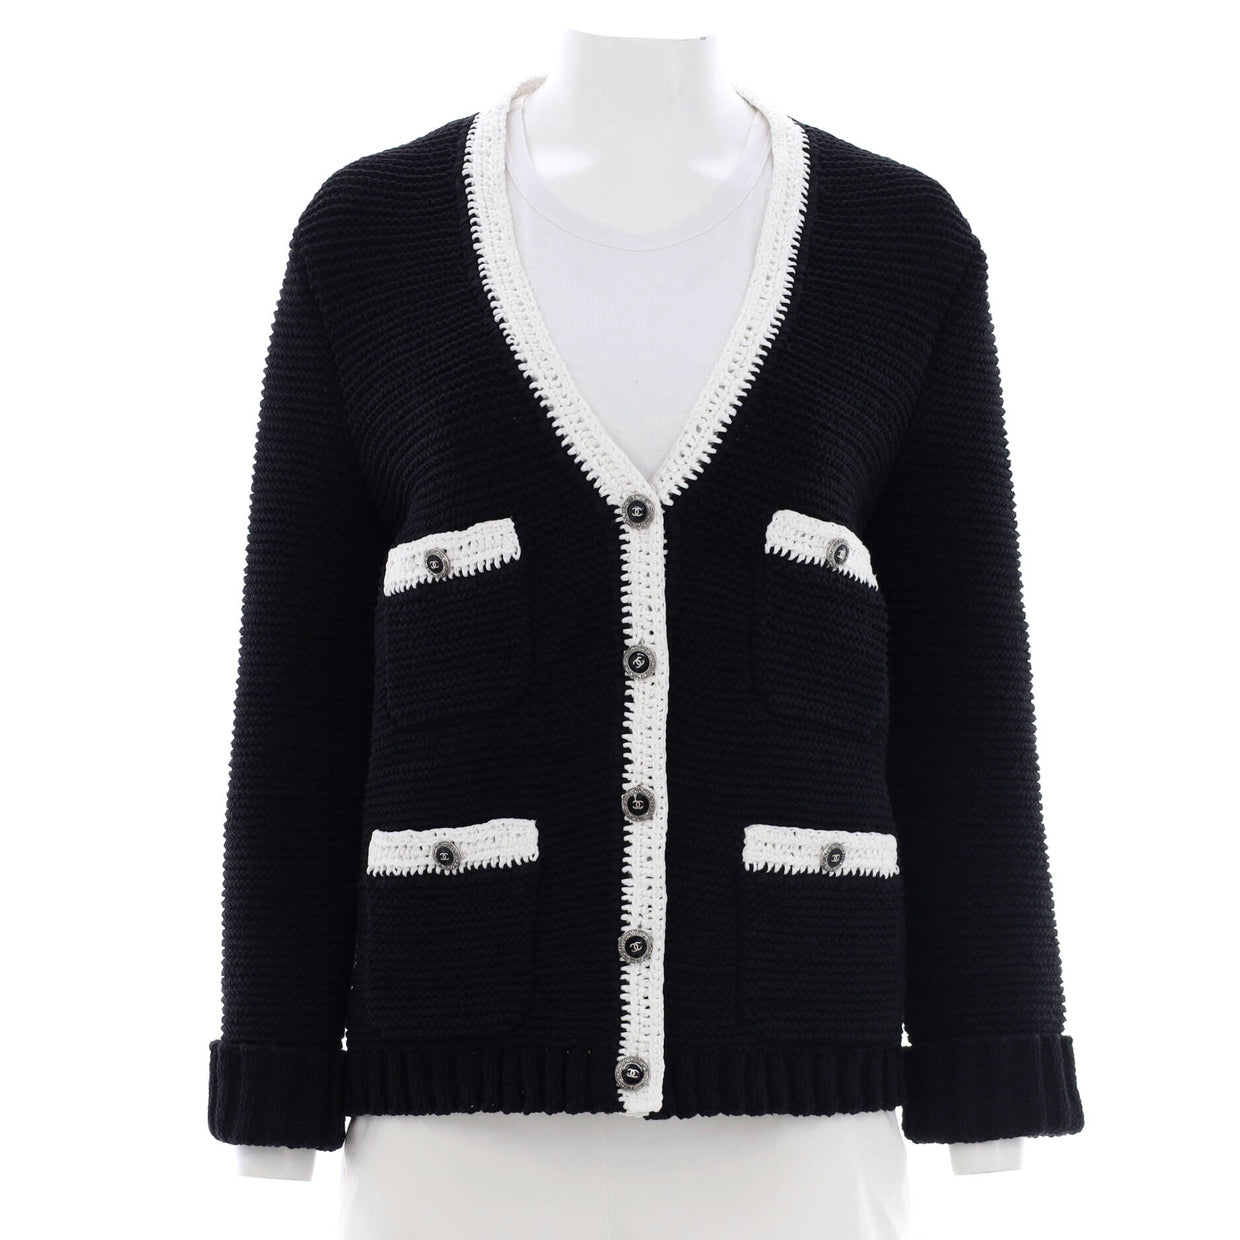 175972 1 20Chanel 20Women S 20CC 20Four 20Pocket 20Cardigan 20Cotton 20and 20Polyamide 2D 0002 1240x1240 ?v=1665166890